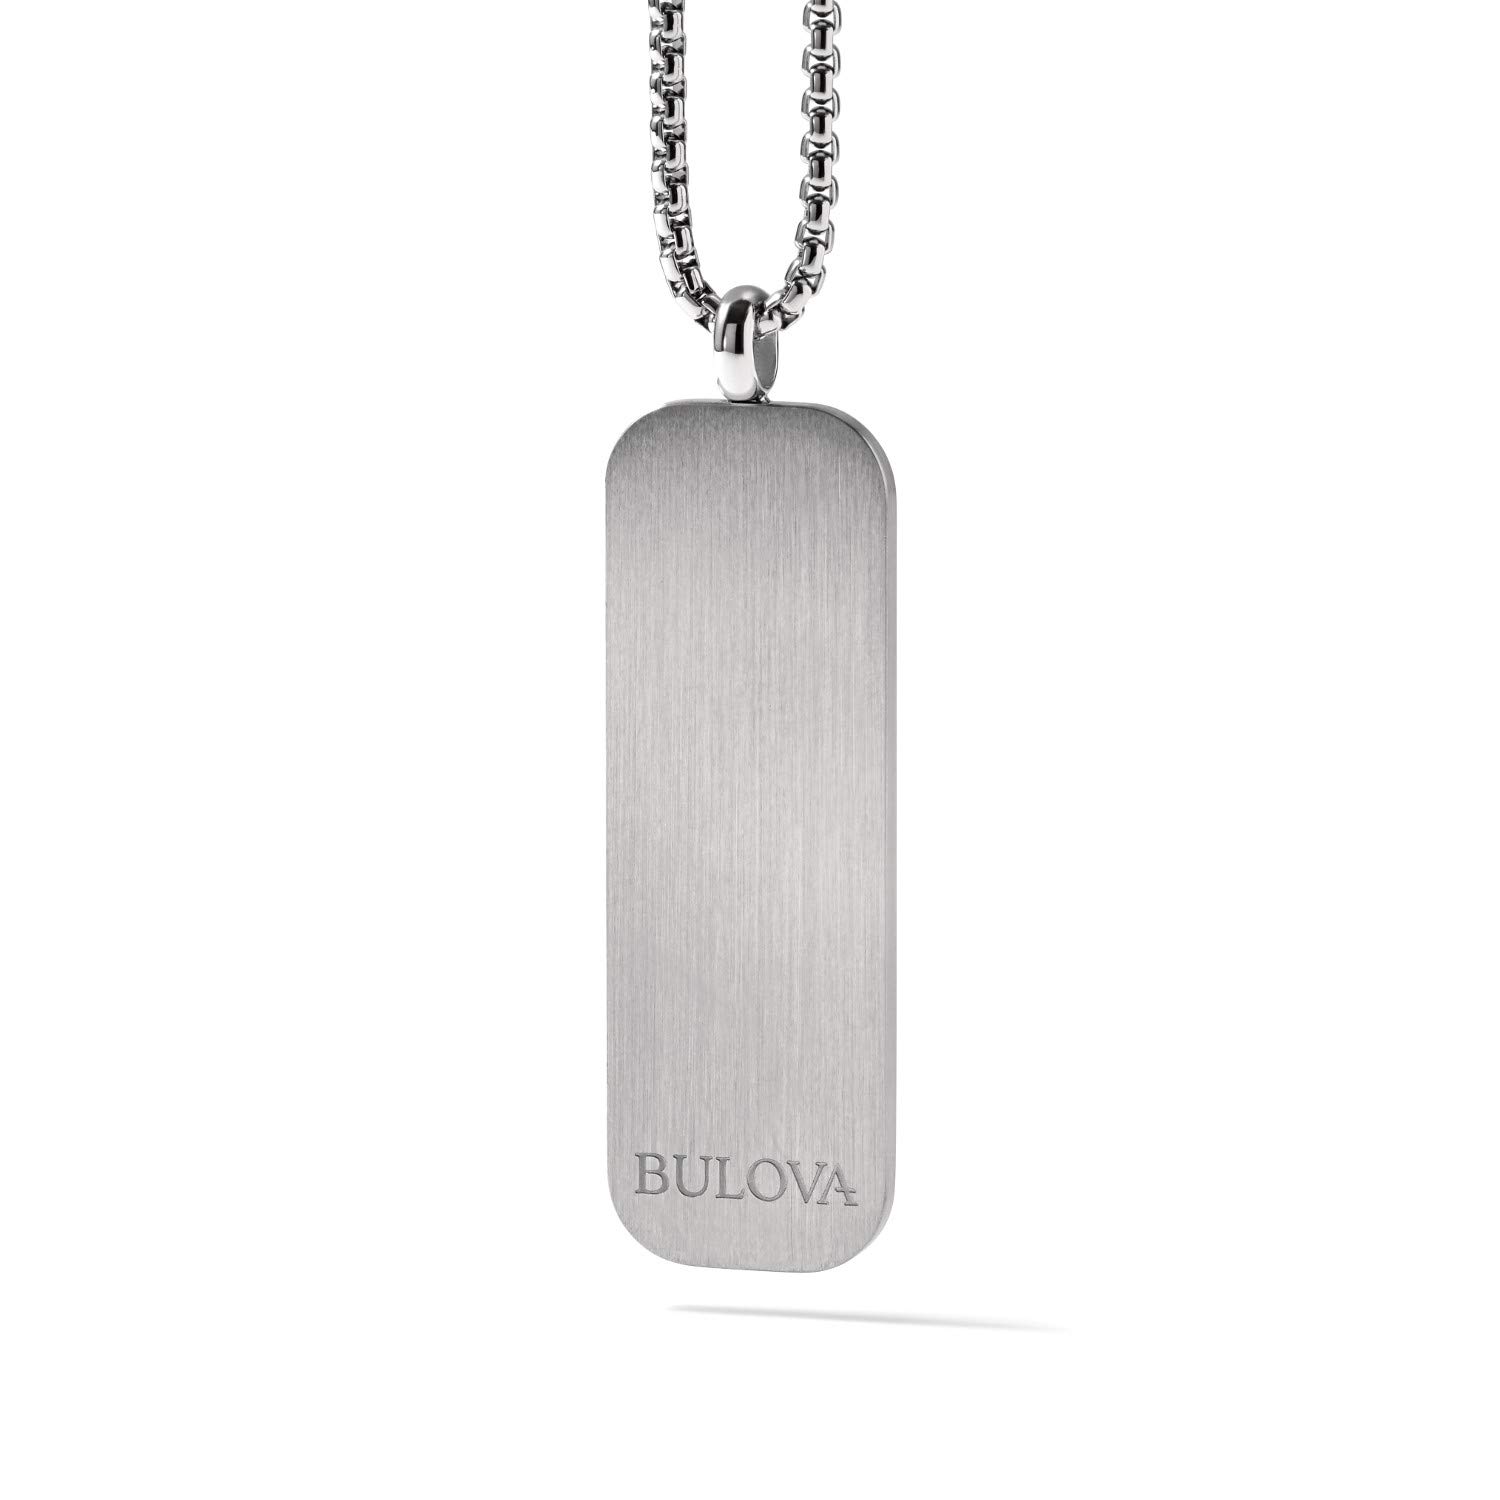 Bulova Men's Classic Round Box Link Chain Necklace with Stainless Steel Dog Tag Pendant Style: J96N009